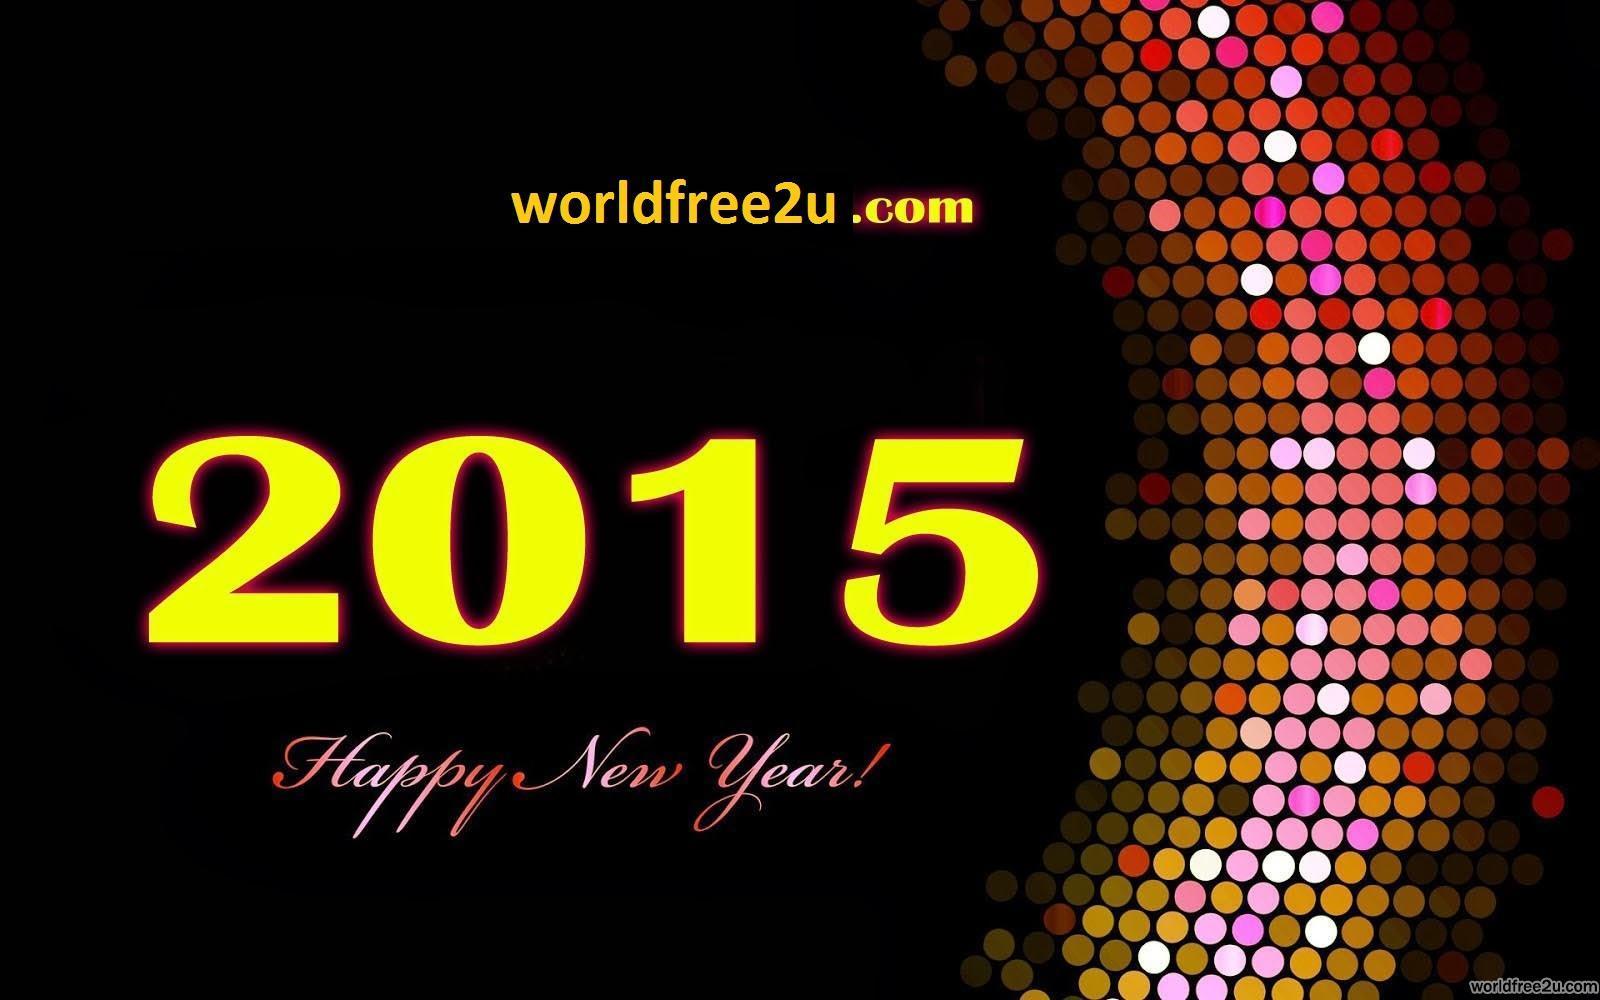 Happy New Year 2015 HD Wallpaper Image Photo Facebook Quotes